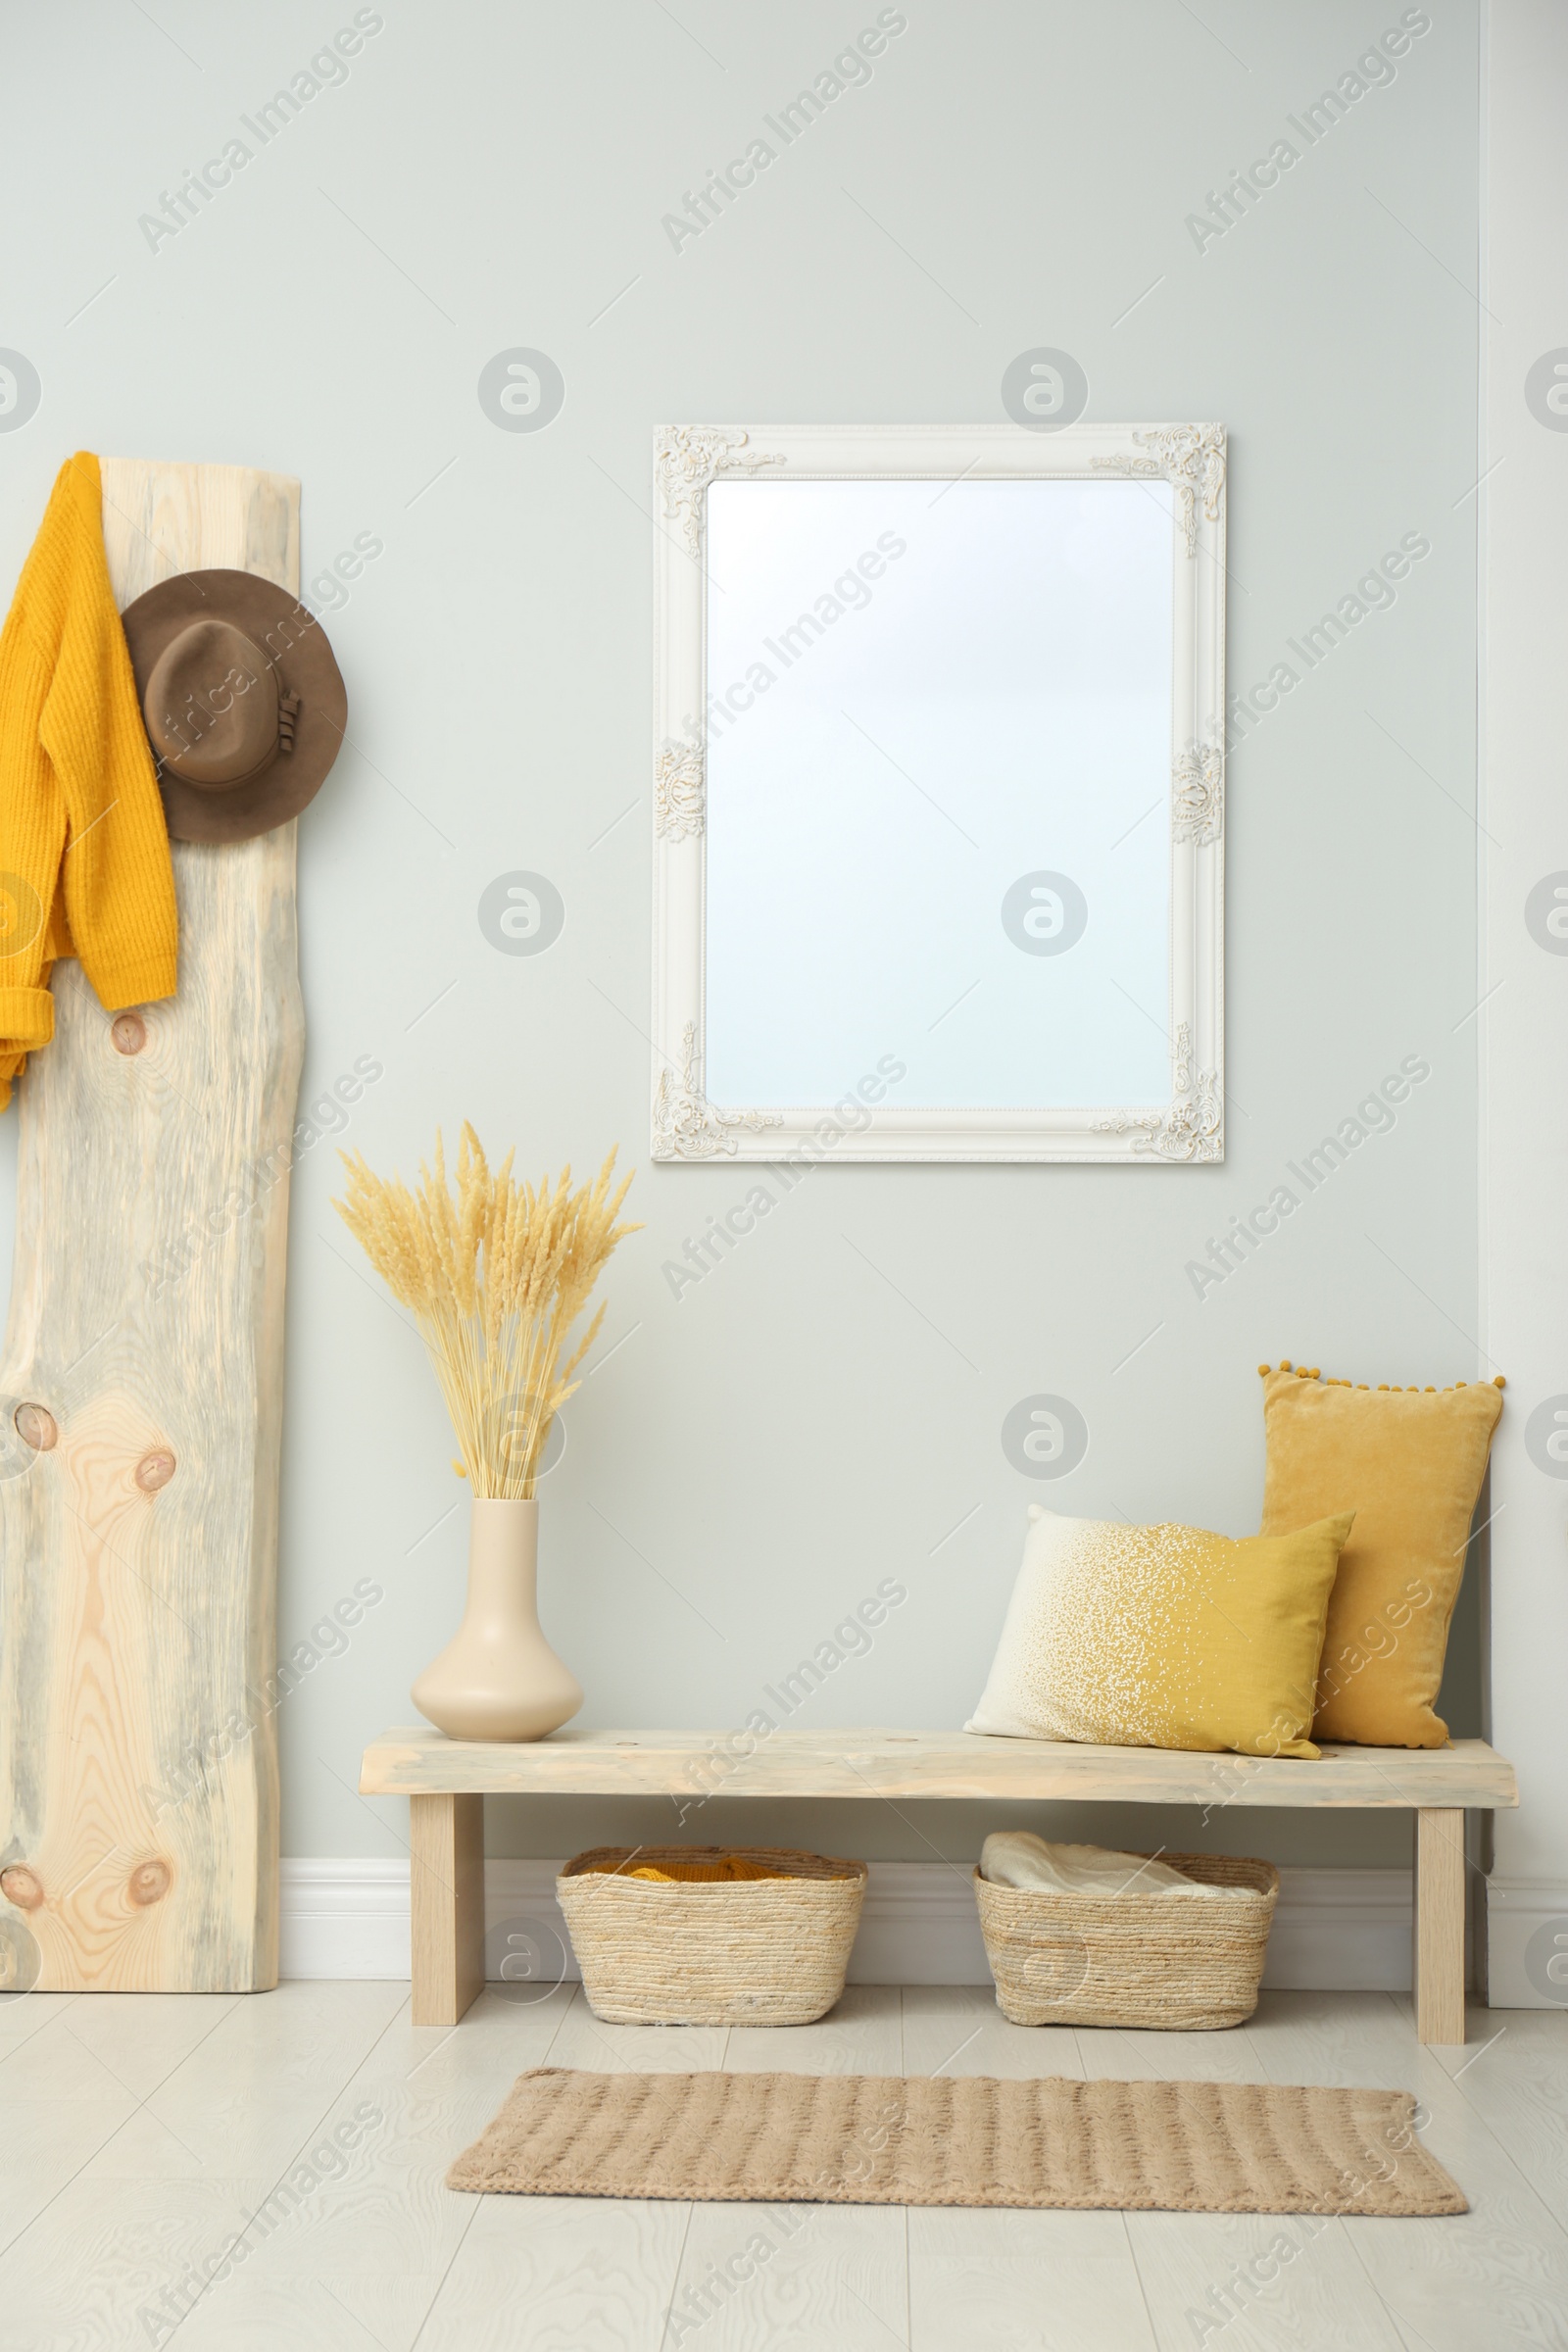 Photo of Hallway interior with wooden bench, clothes and mirror